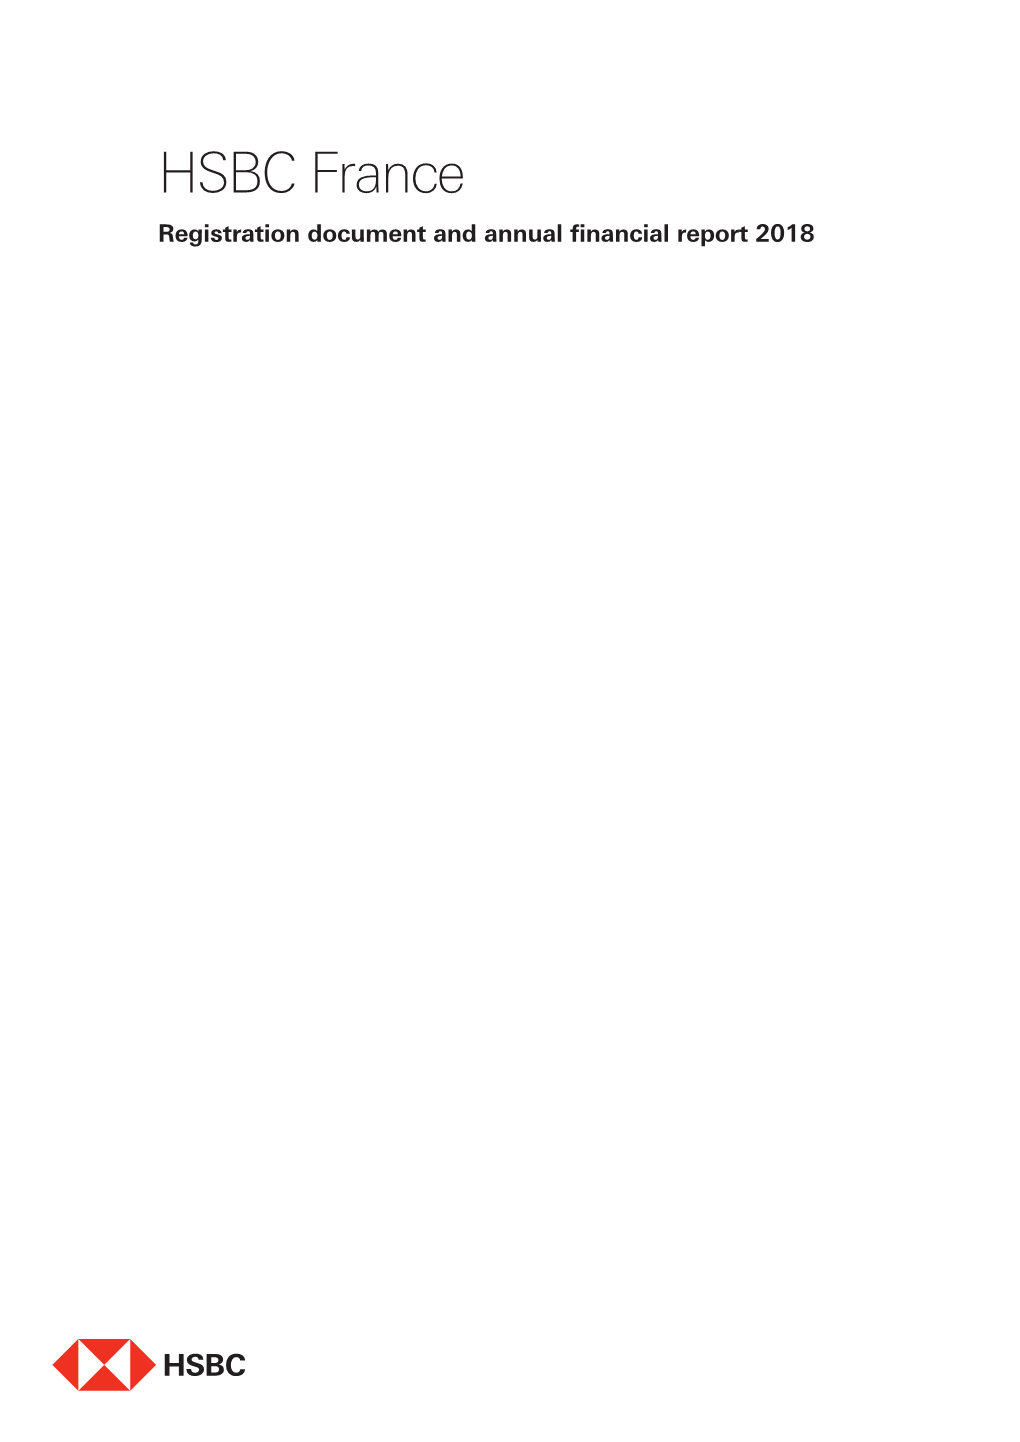 Registration Document and Annual Financial Report 2018